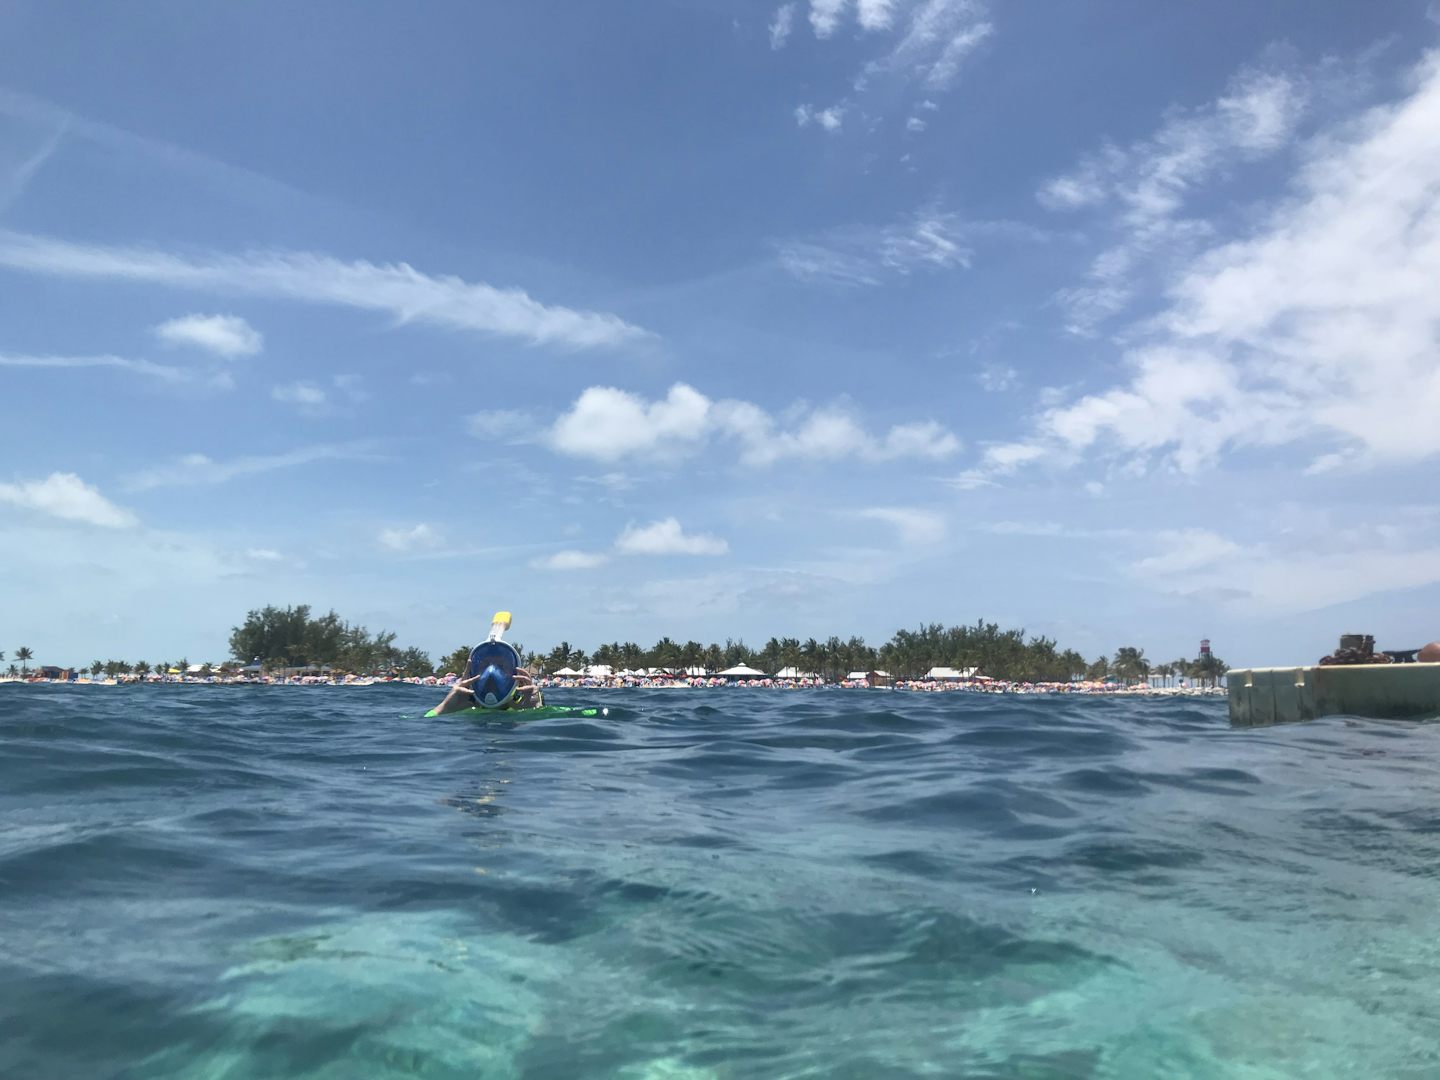 View of Cococay while out Snorkling